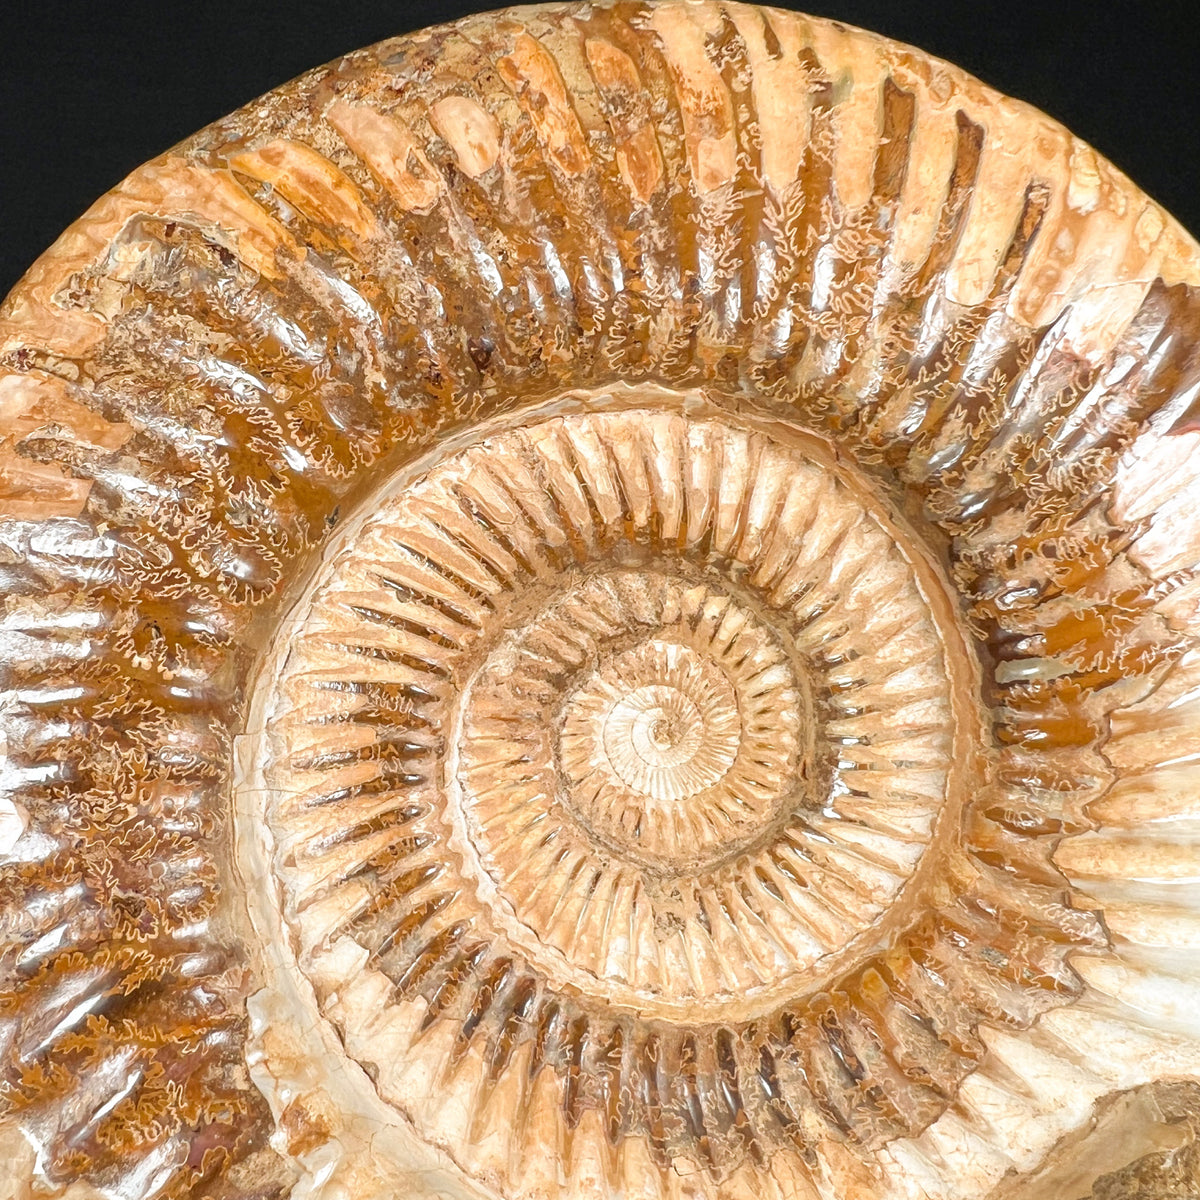 Close Up of Ammonite Fossil Suture Marks